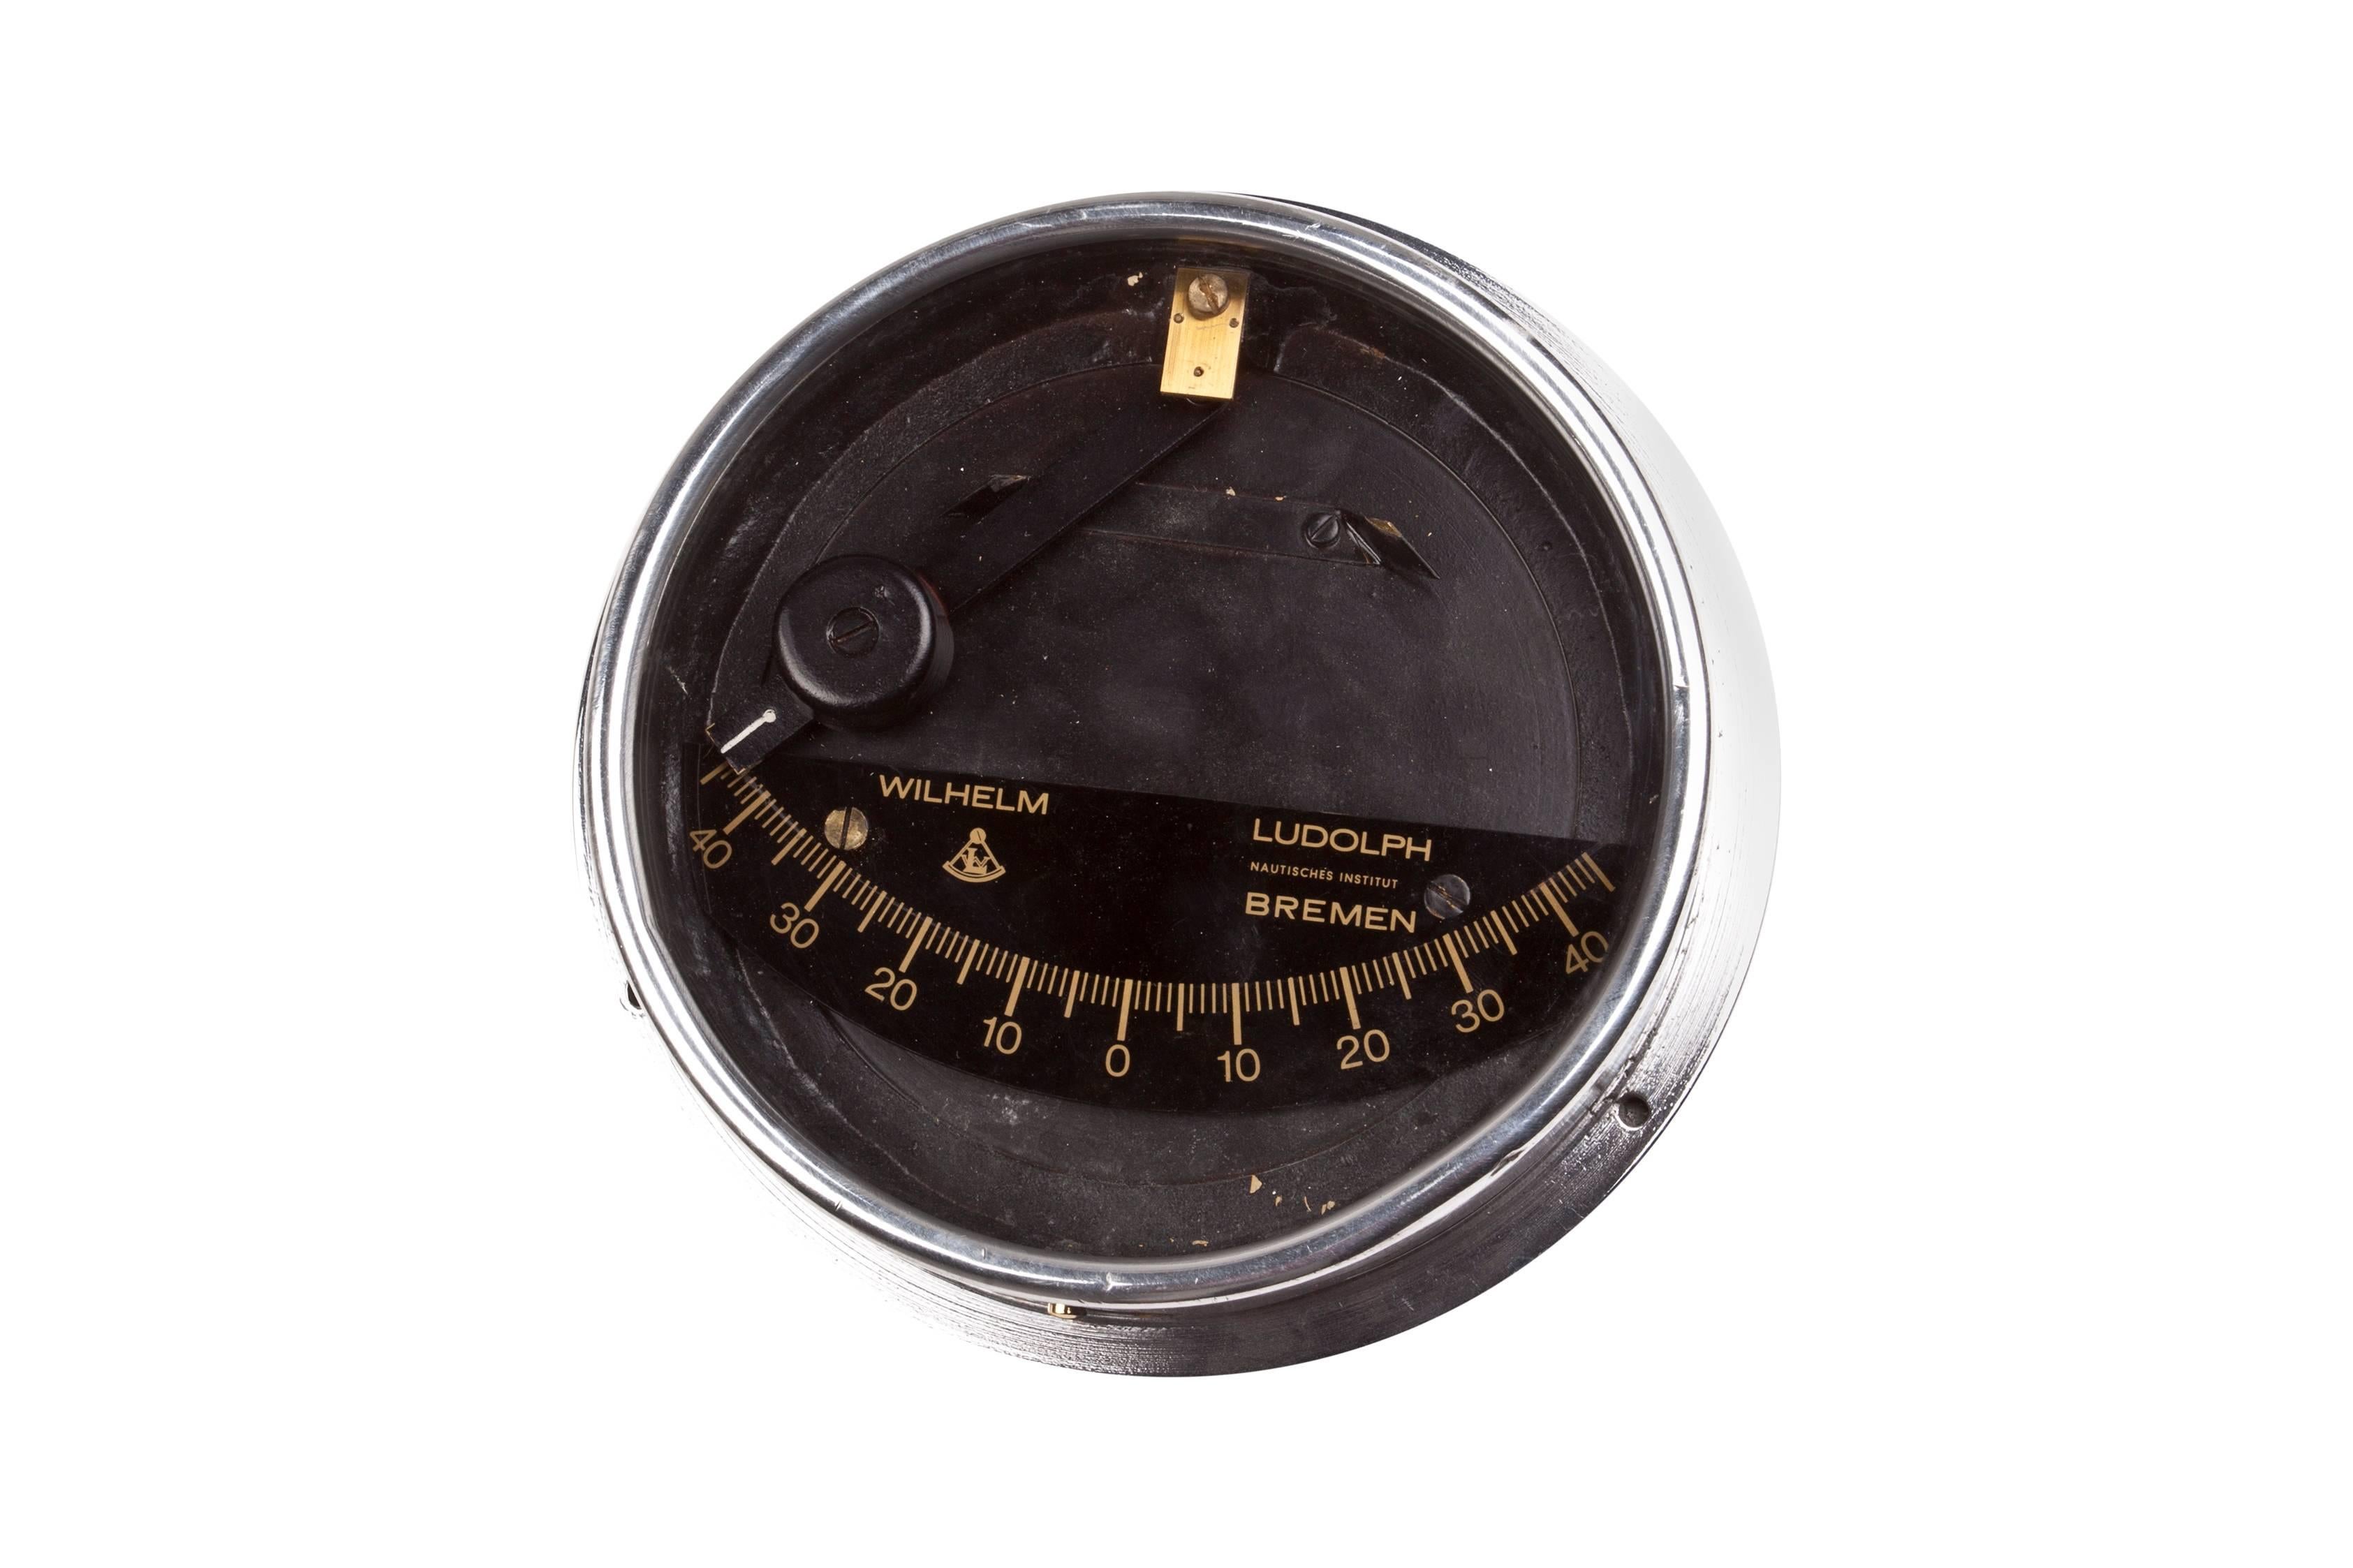 A chrome ship's clinometer made by world-renowned Wilhelm Ludolph/Institut Bremen of Germany and signed as such. These tilt gauges were used on vessels to measure the angular slant of the ship. The readings are important whether underway, but also